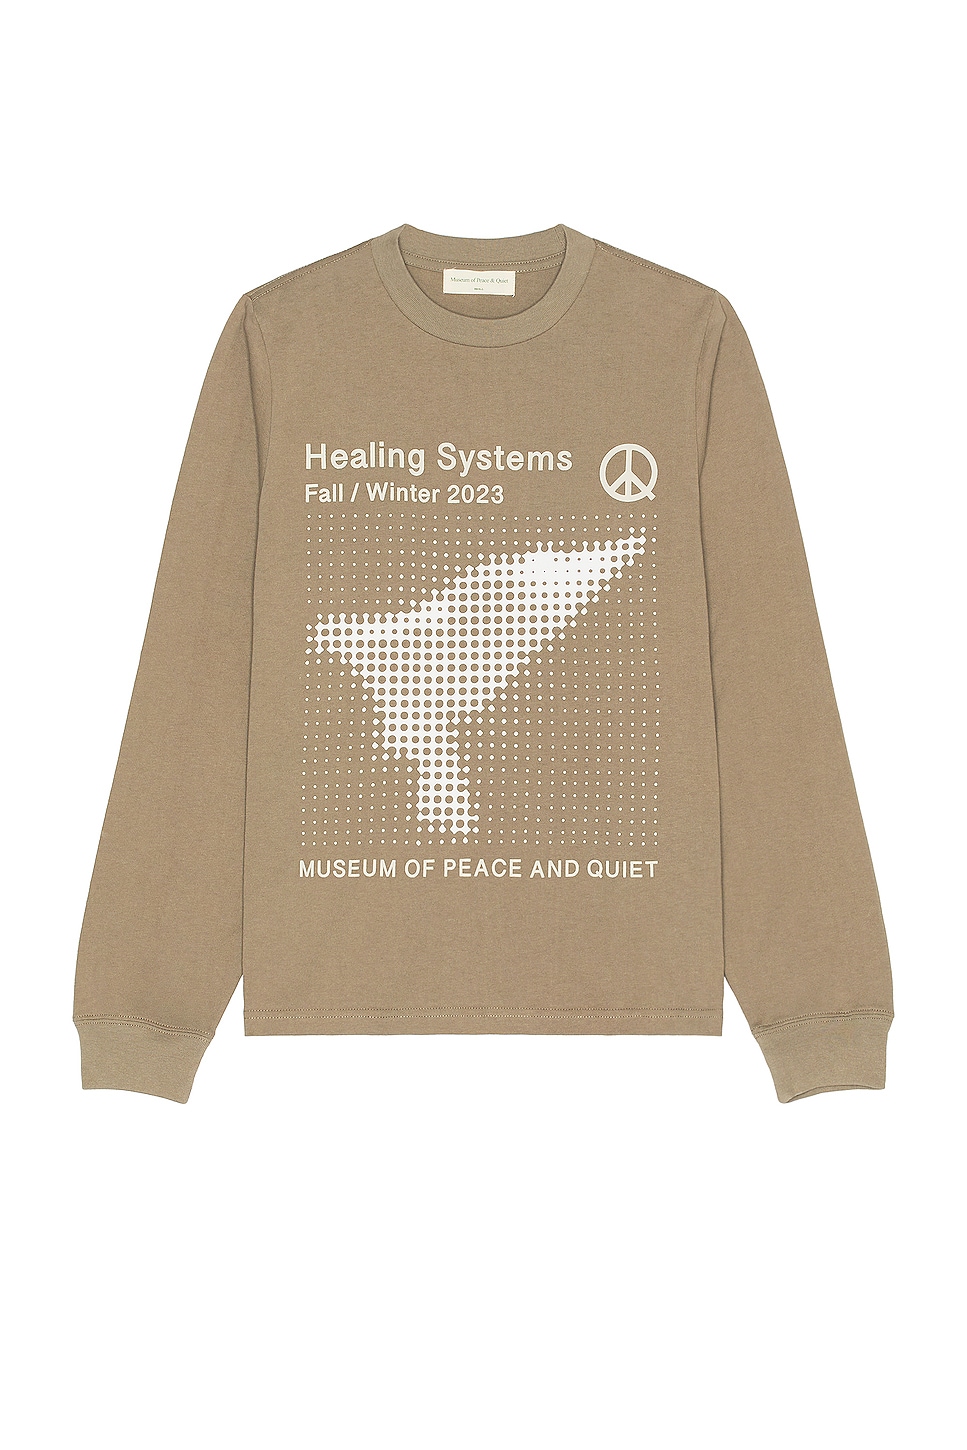 Image 1 of Museum of Peace and Quiet Healing Systems Long Sleeve T-shirt in Clay